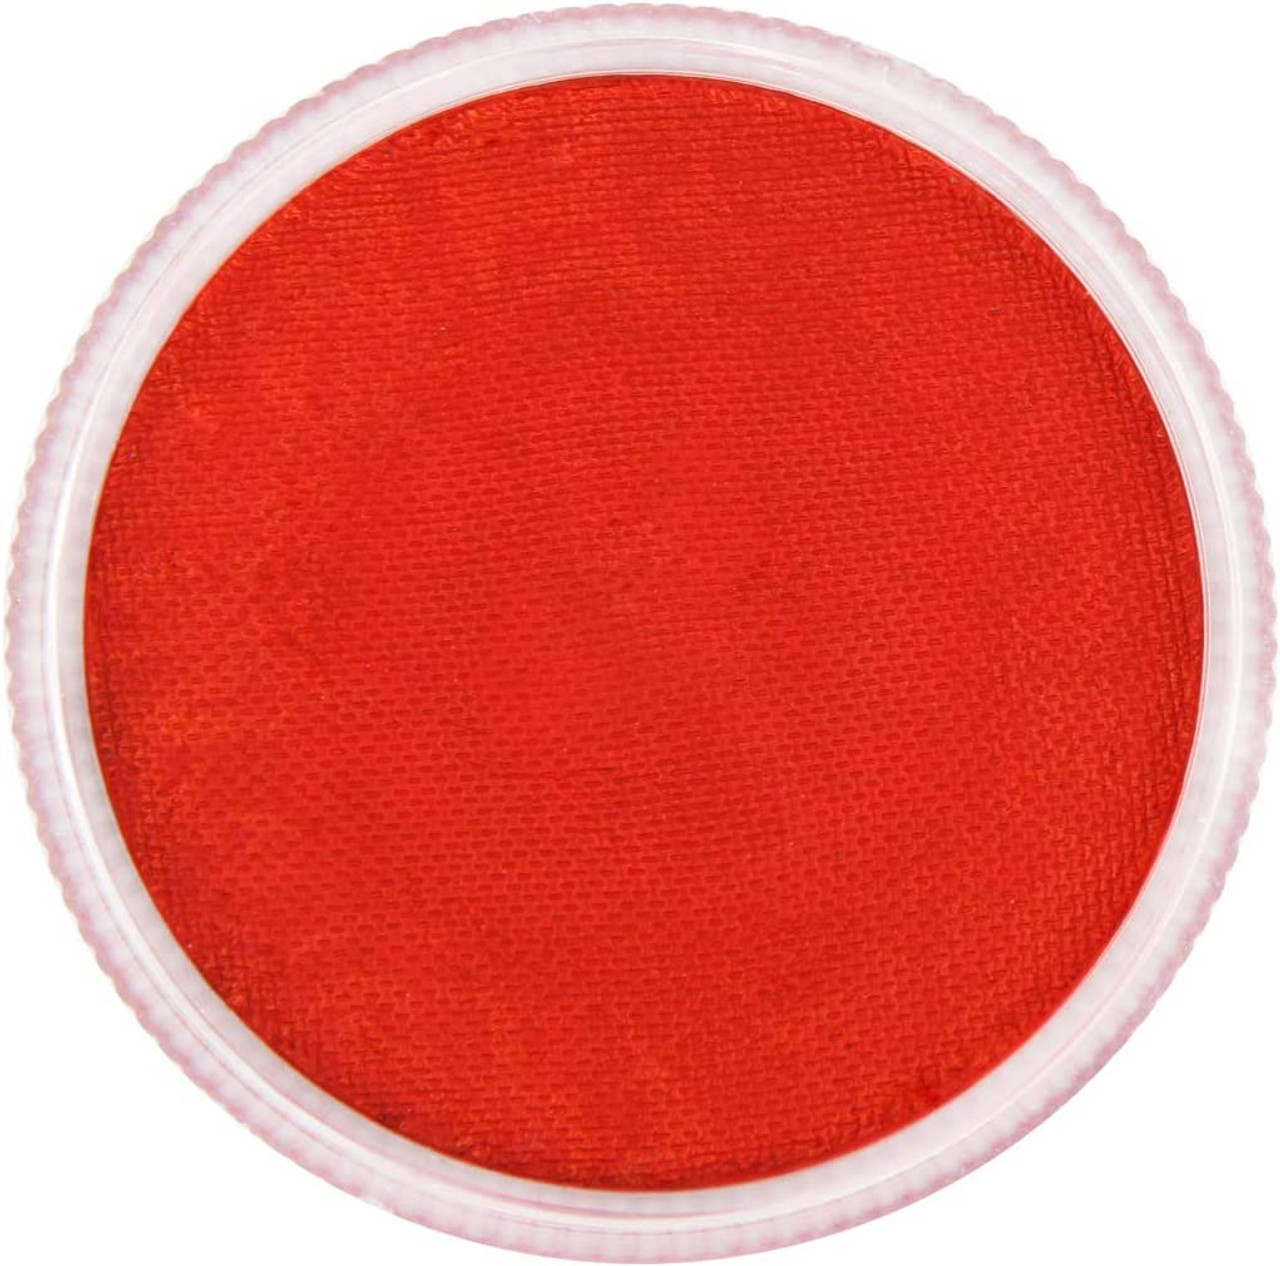 Maydear Face Body Paint Orange,Classic Single,Professional Face Paint  Palette,Large Water Based Paints (30g) 